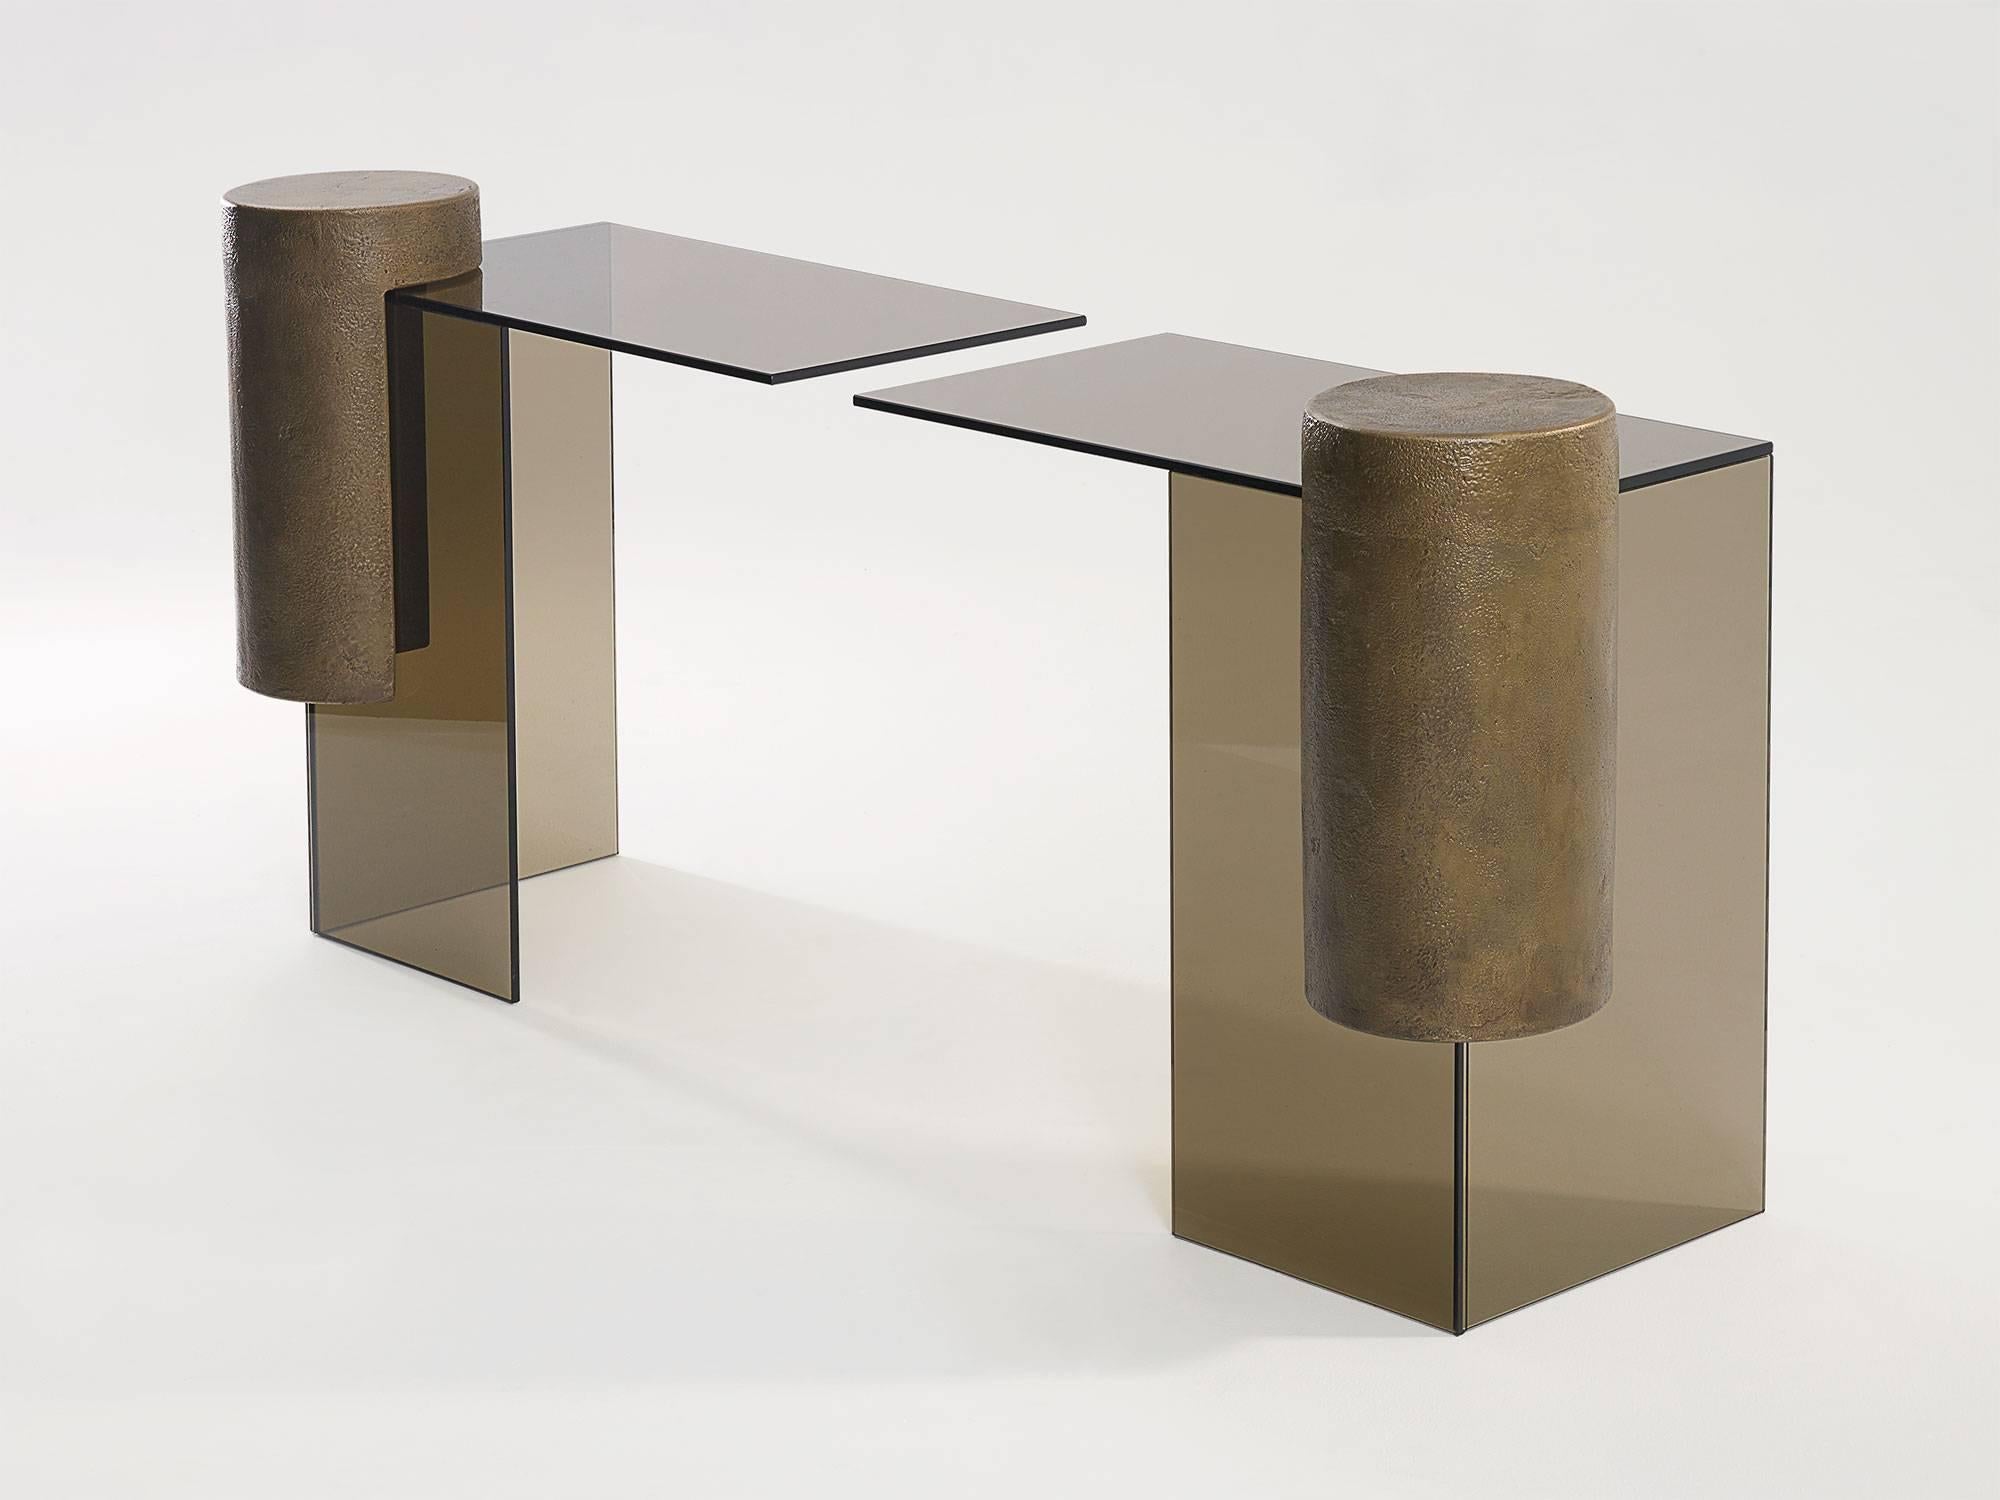 Smoked glass and brass console table comprised of two separate tables reaching towards each other by Los Angeles designer Brian Thoreen. Cantilevered by a brass column, the glass elements reach towards each other to create the table surface.